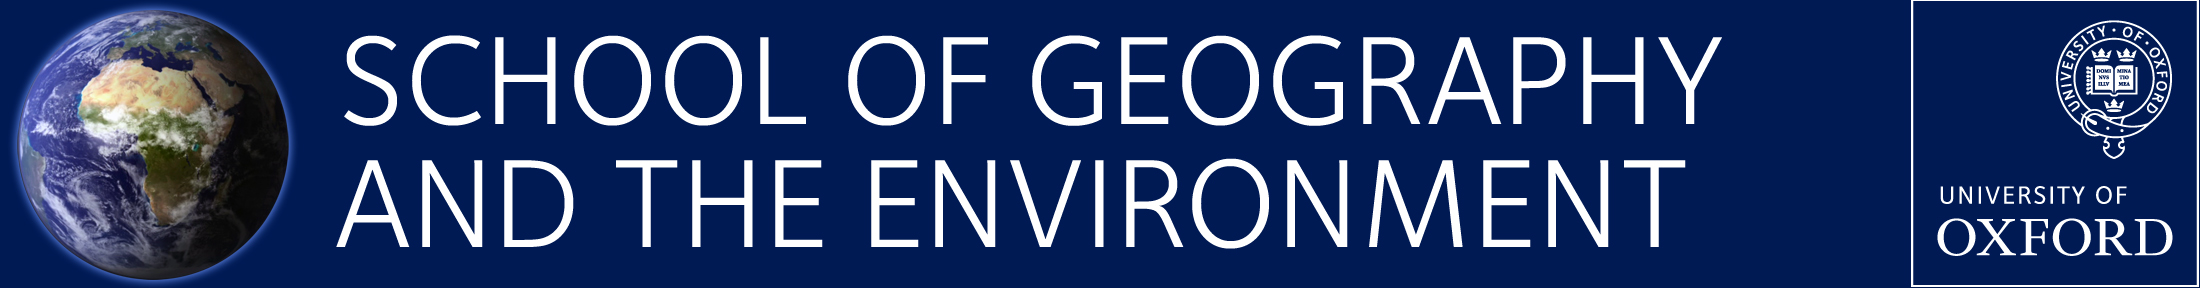 School of Geography and the Environment, University of Oxford